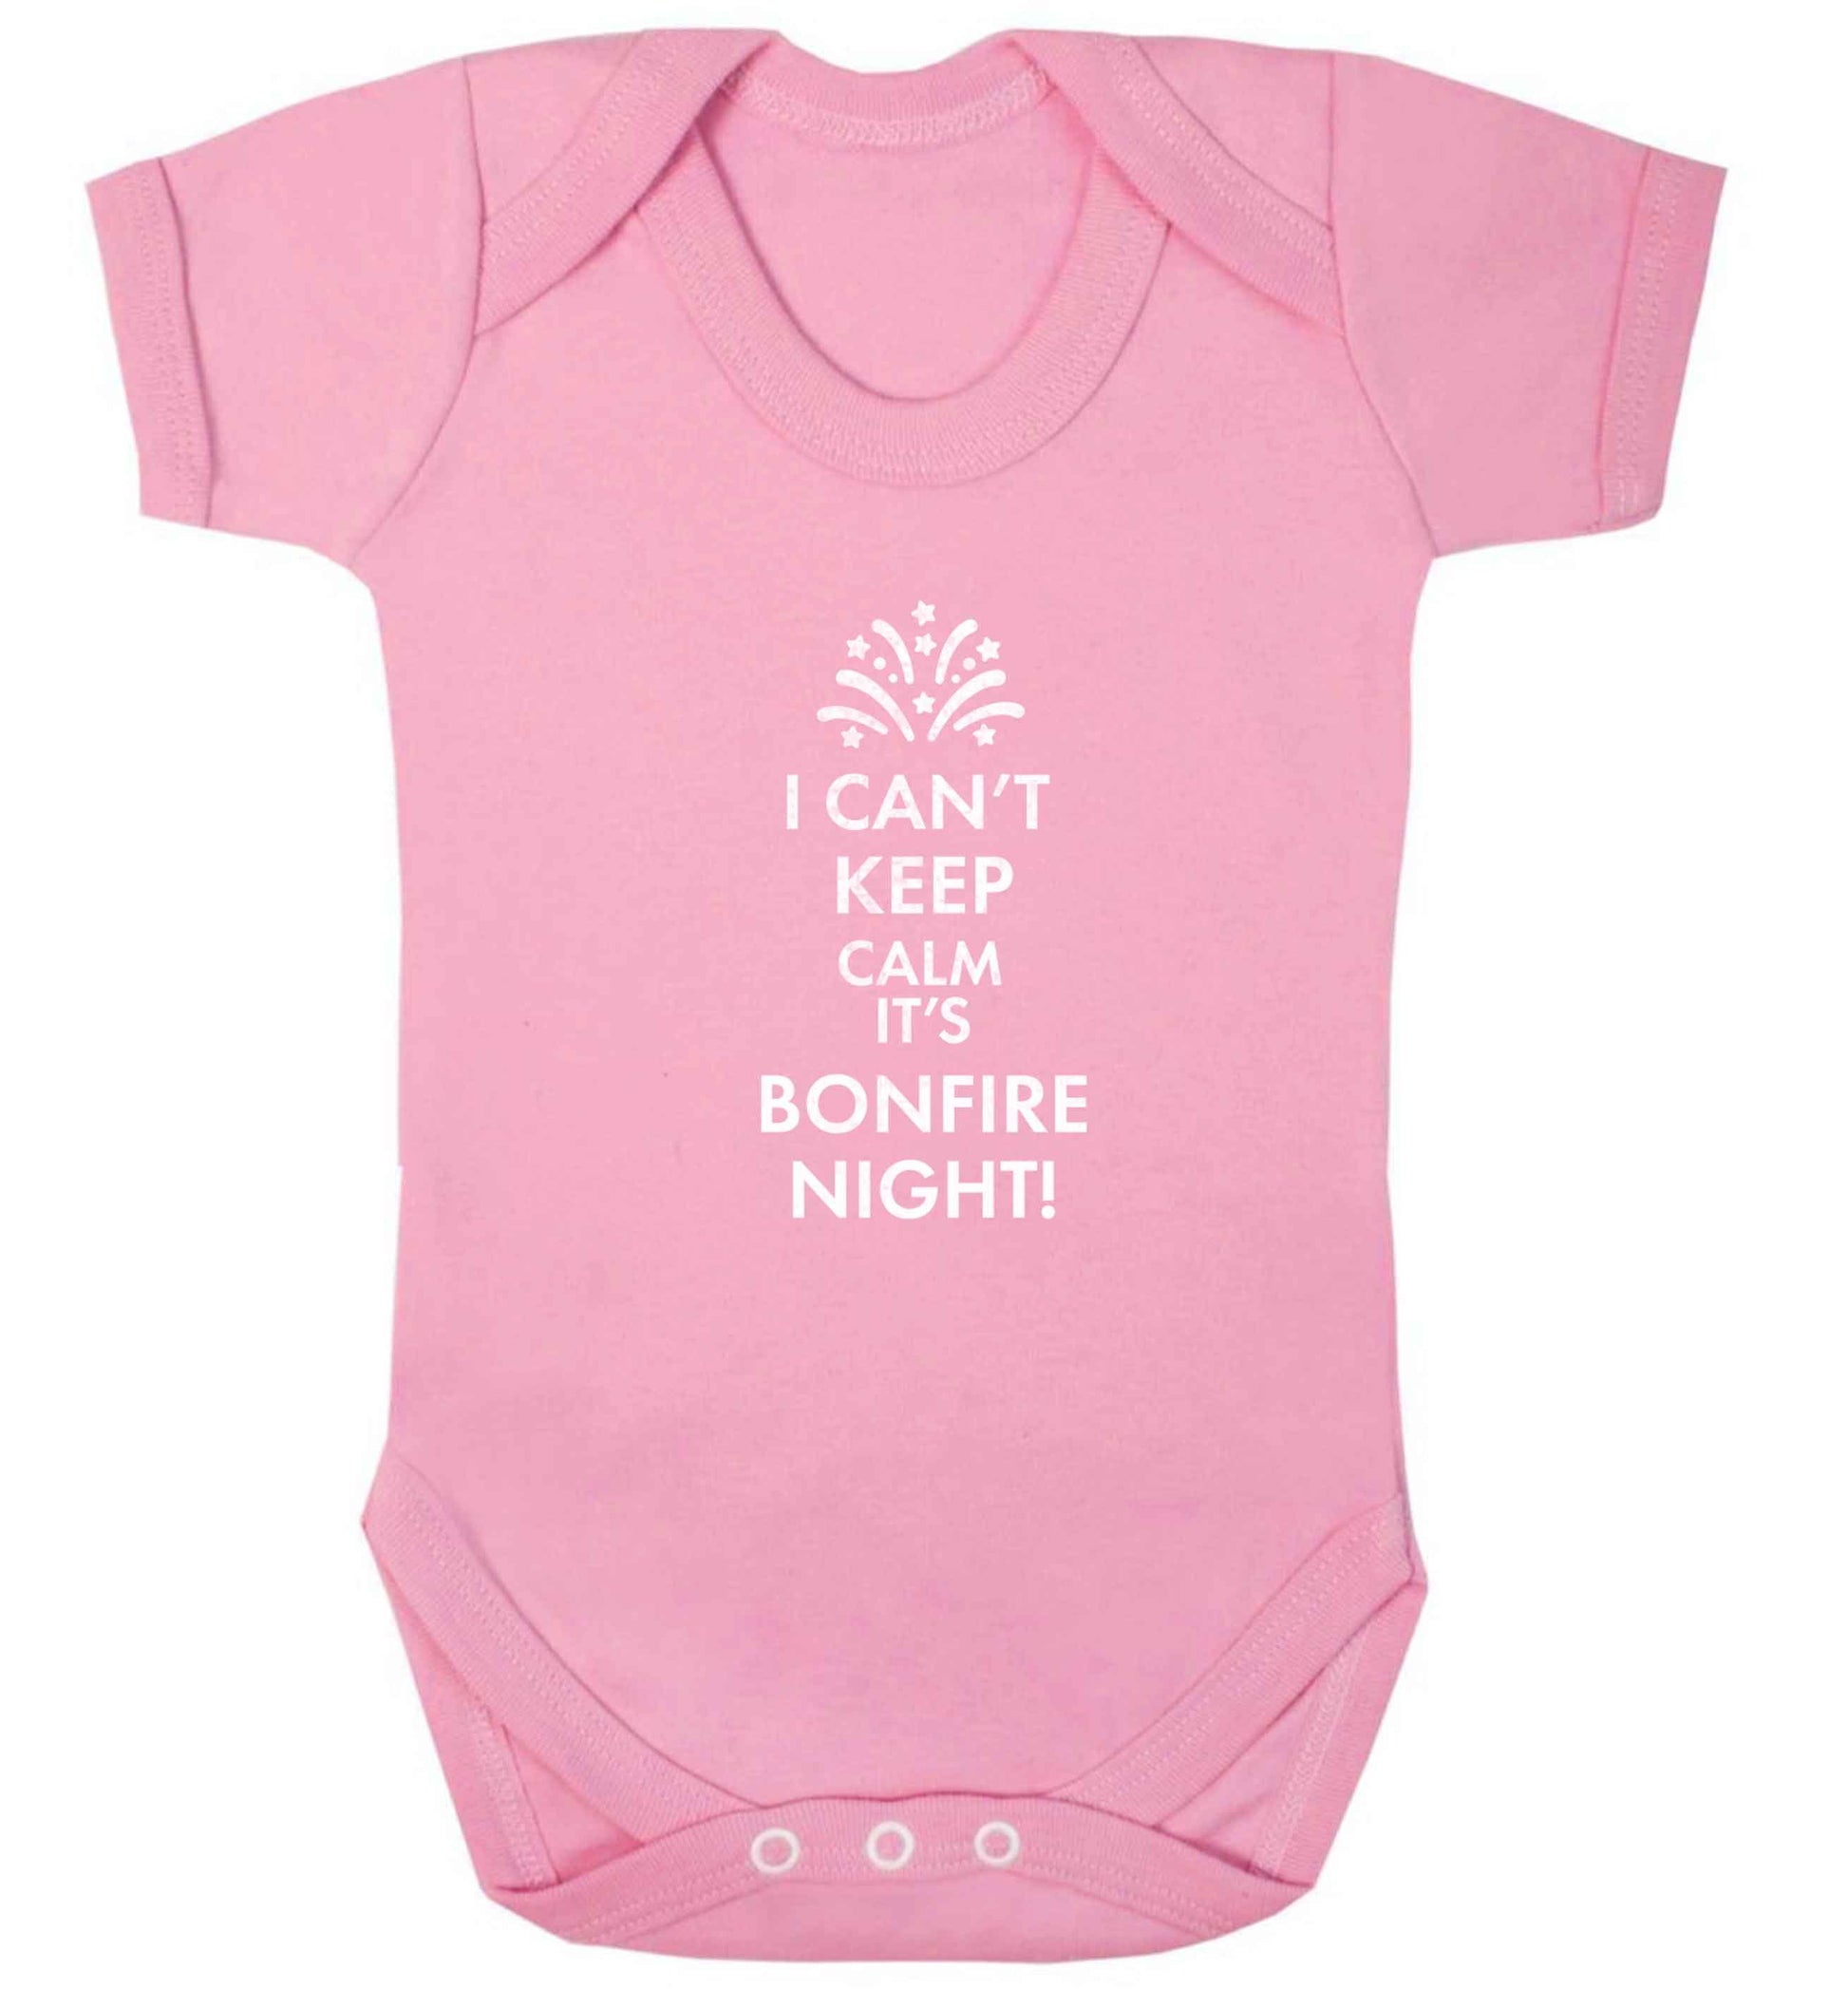 I can't keep calm its bonfire night baby vest pale pink 18-24 months